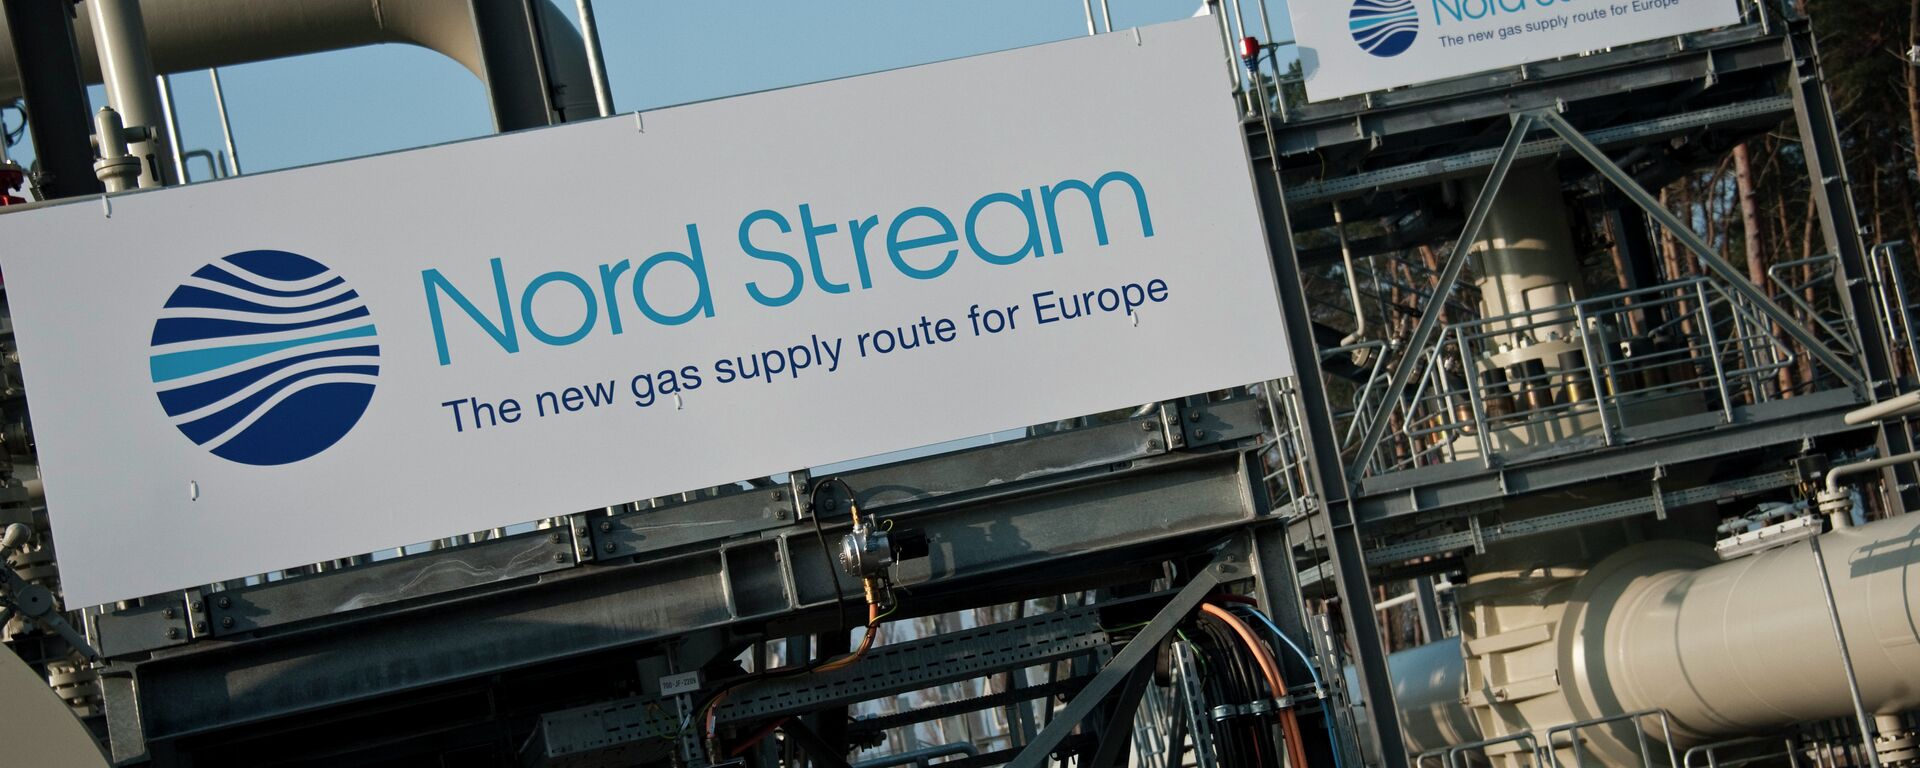 View of the Nordstream gas pipeline terminal prior to an inaugural ceremony for the first of Nord Stream's twin 1,224 kilometre gas pipeline through the baltic sea, in Lubmin November 8, 2011 - Sputnik International, 1920, 24.08.2022